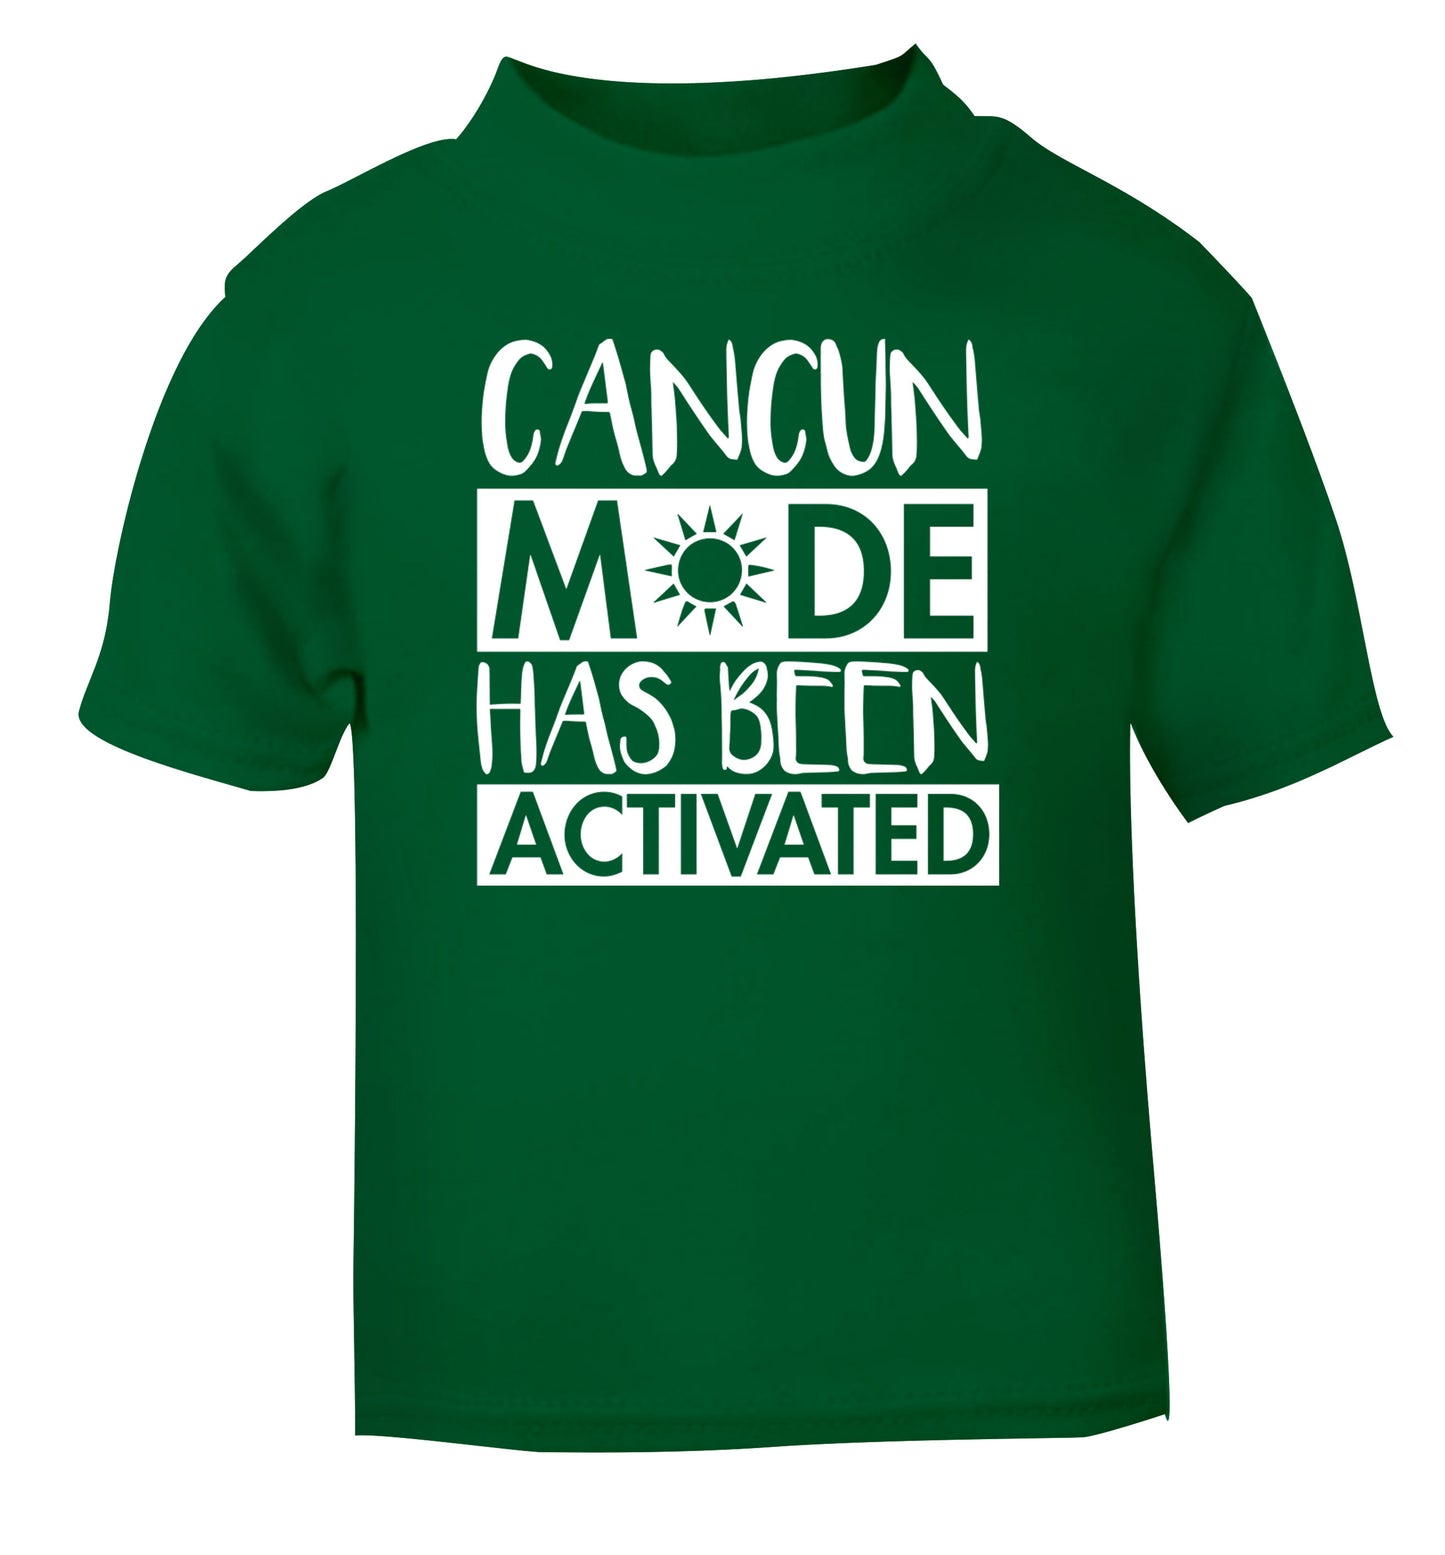 Cancun mode has been activated green Baby Toddler Tshirt 2 Years